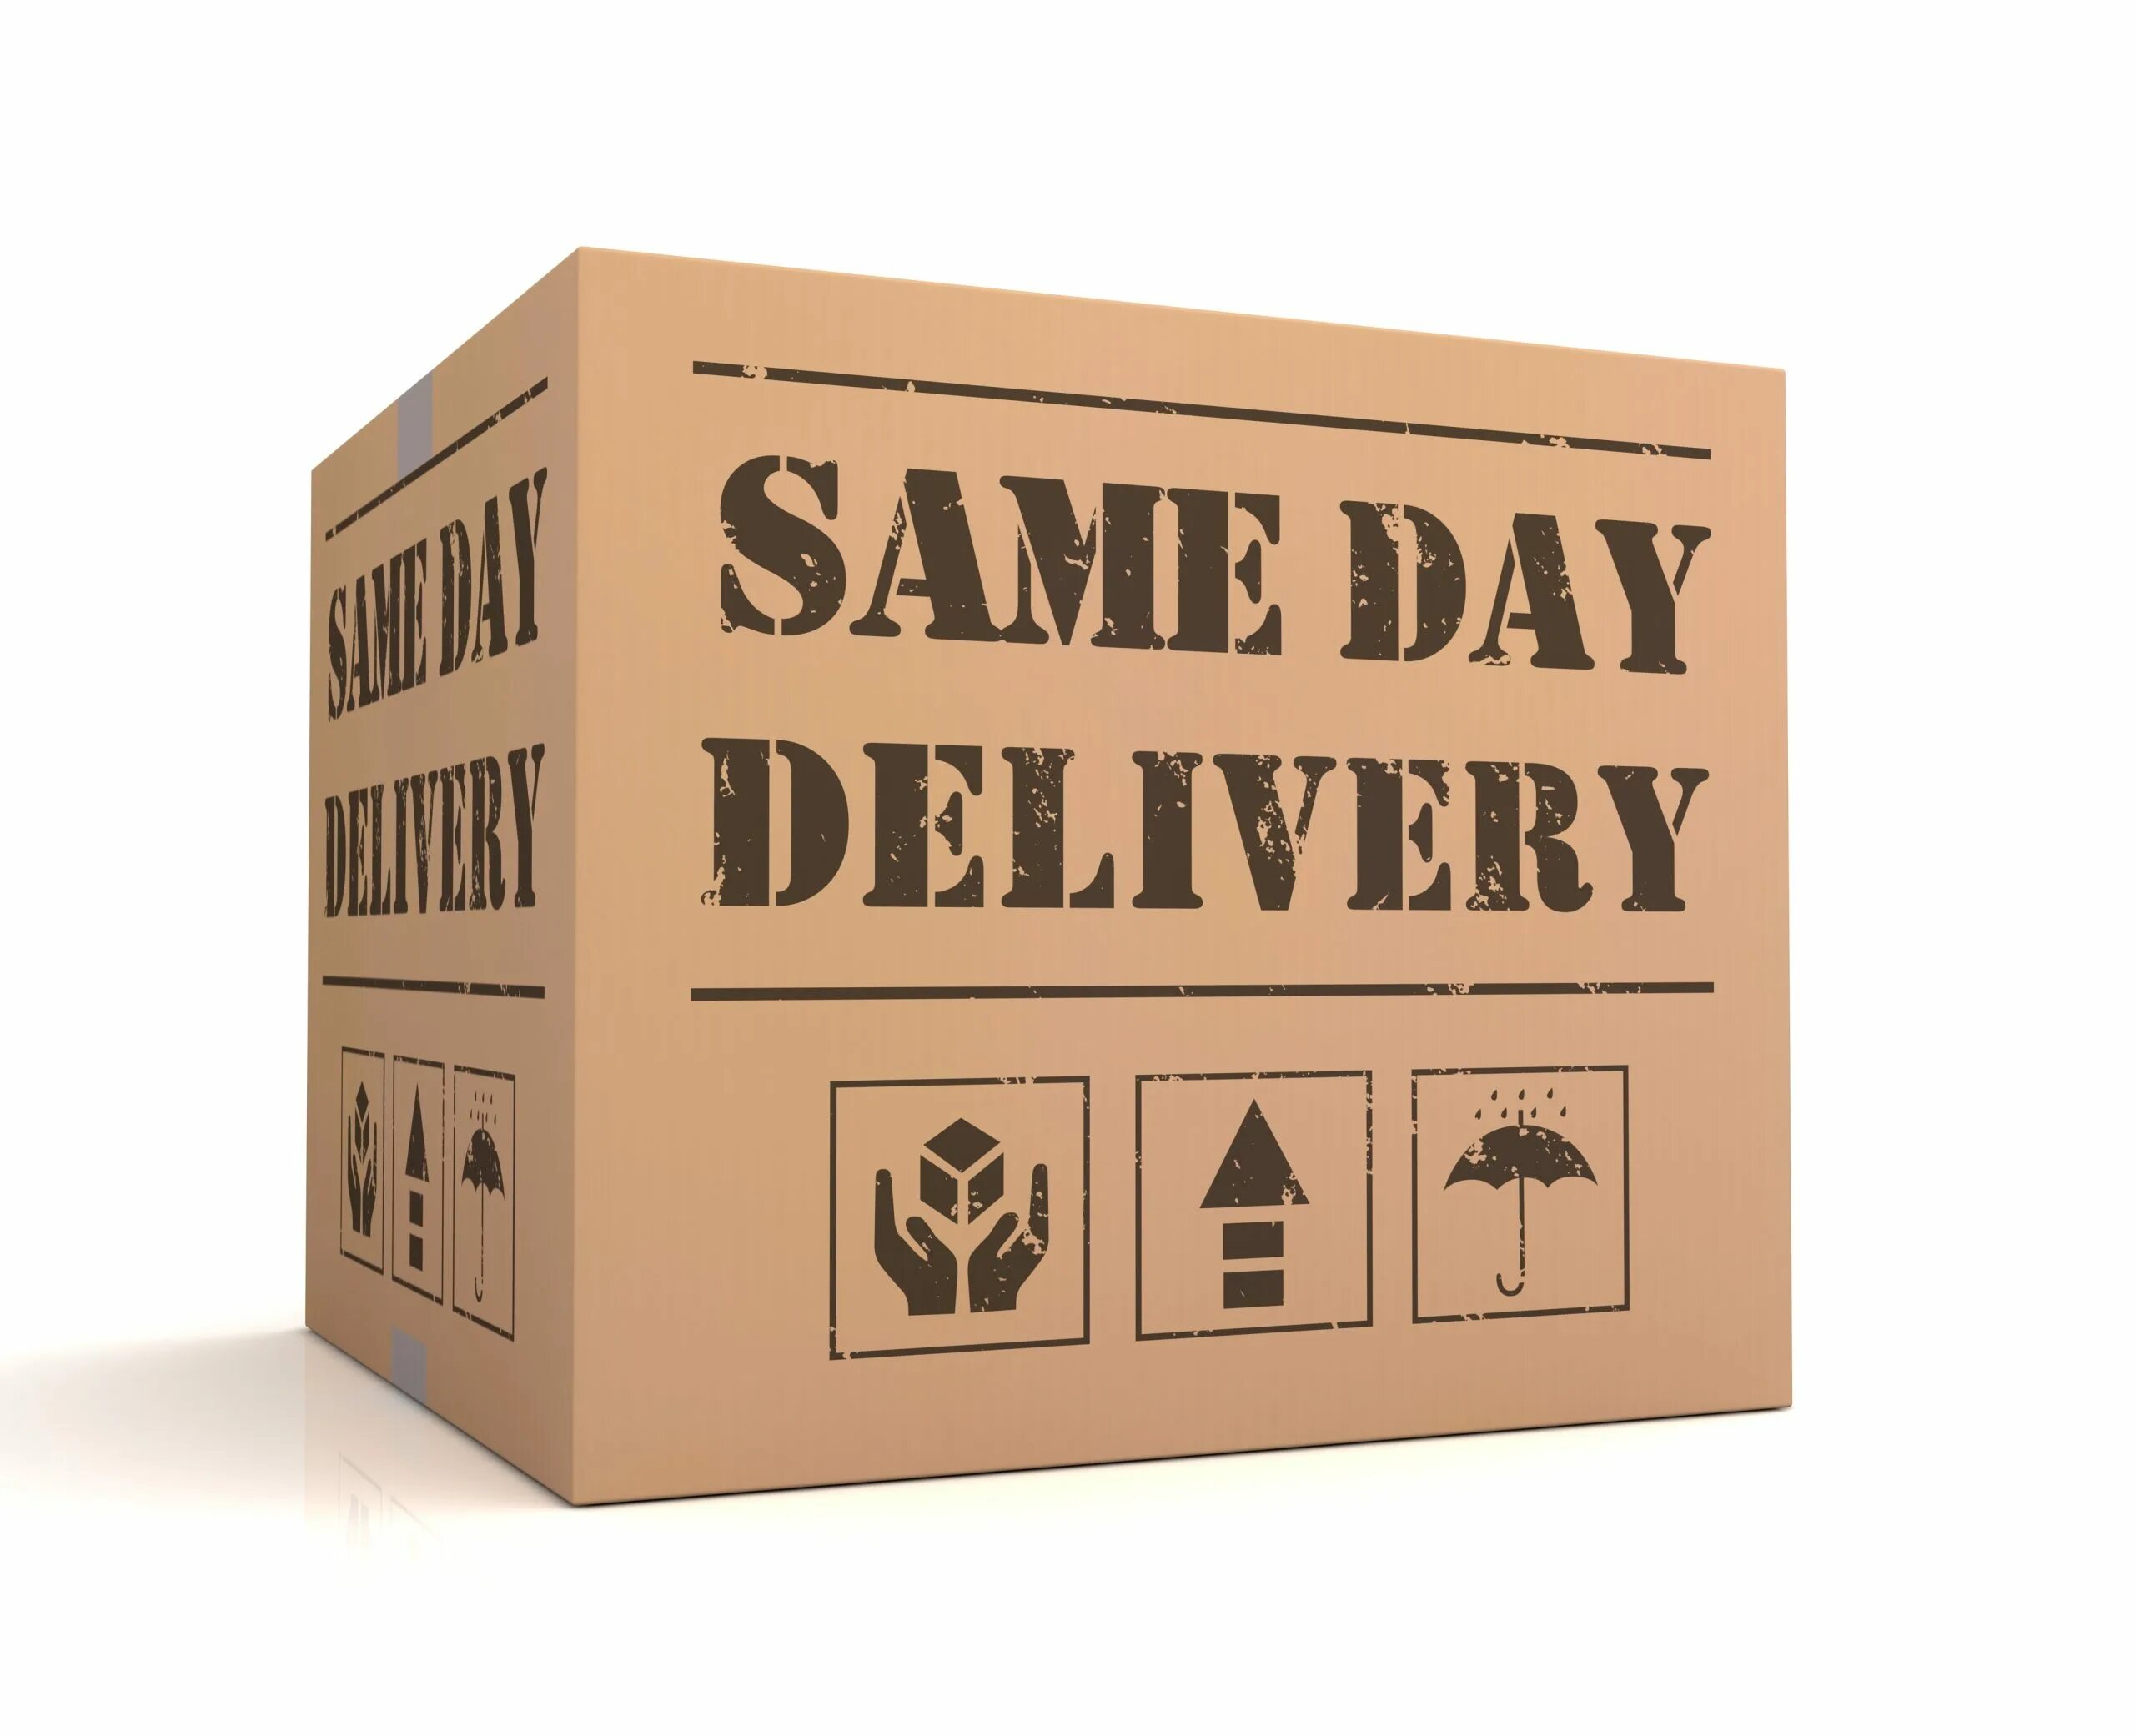 Everyday the same. Same-Day shipping. Delivery 3d illustration. Export Box. Send a Plant same Day delivery.